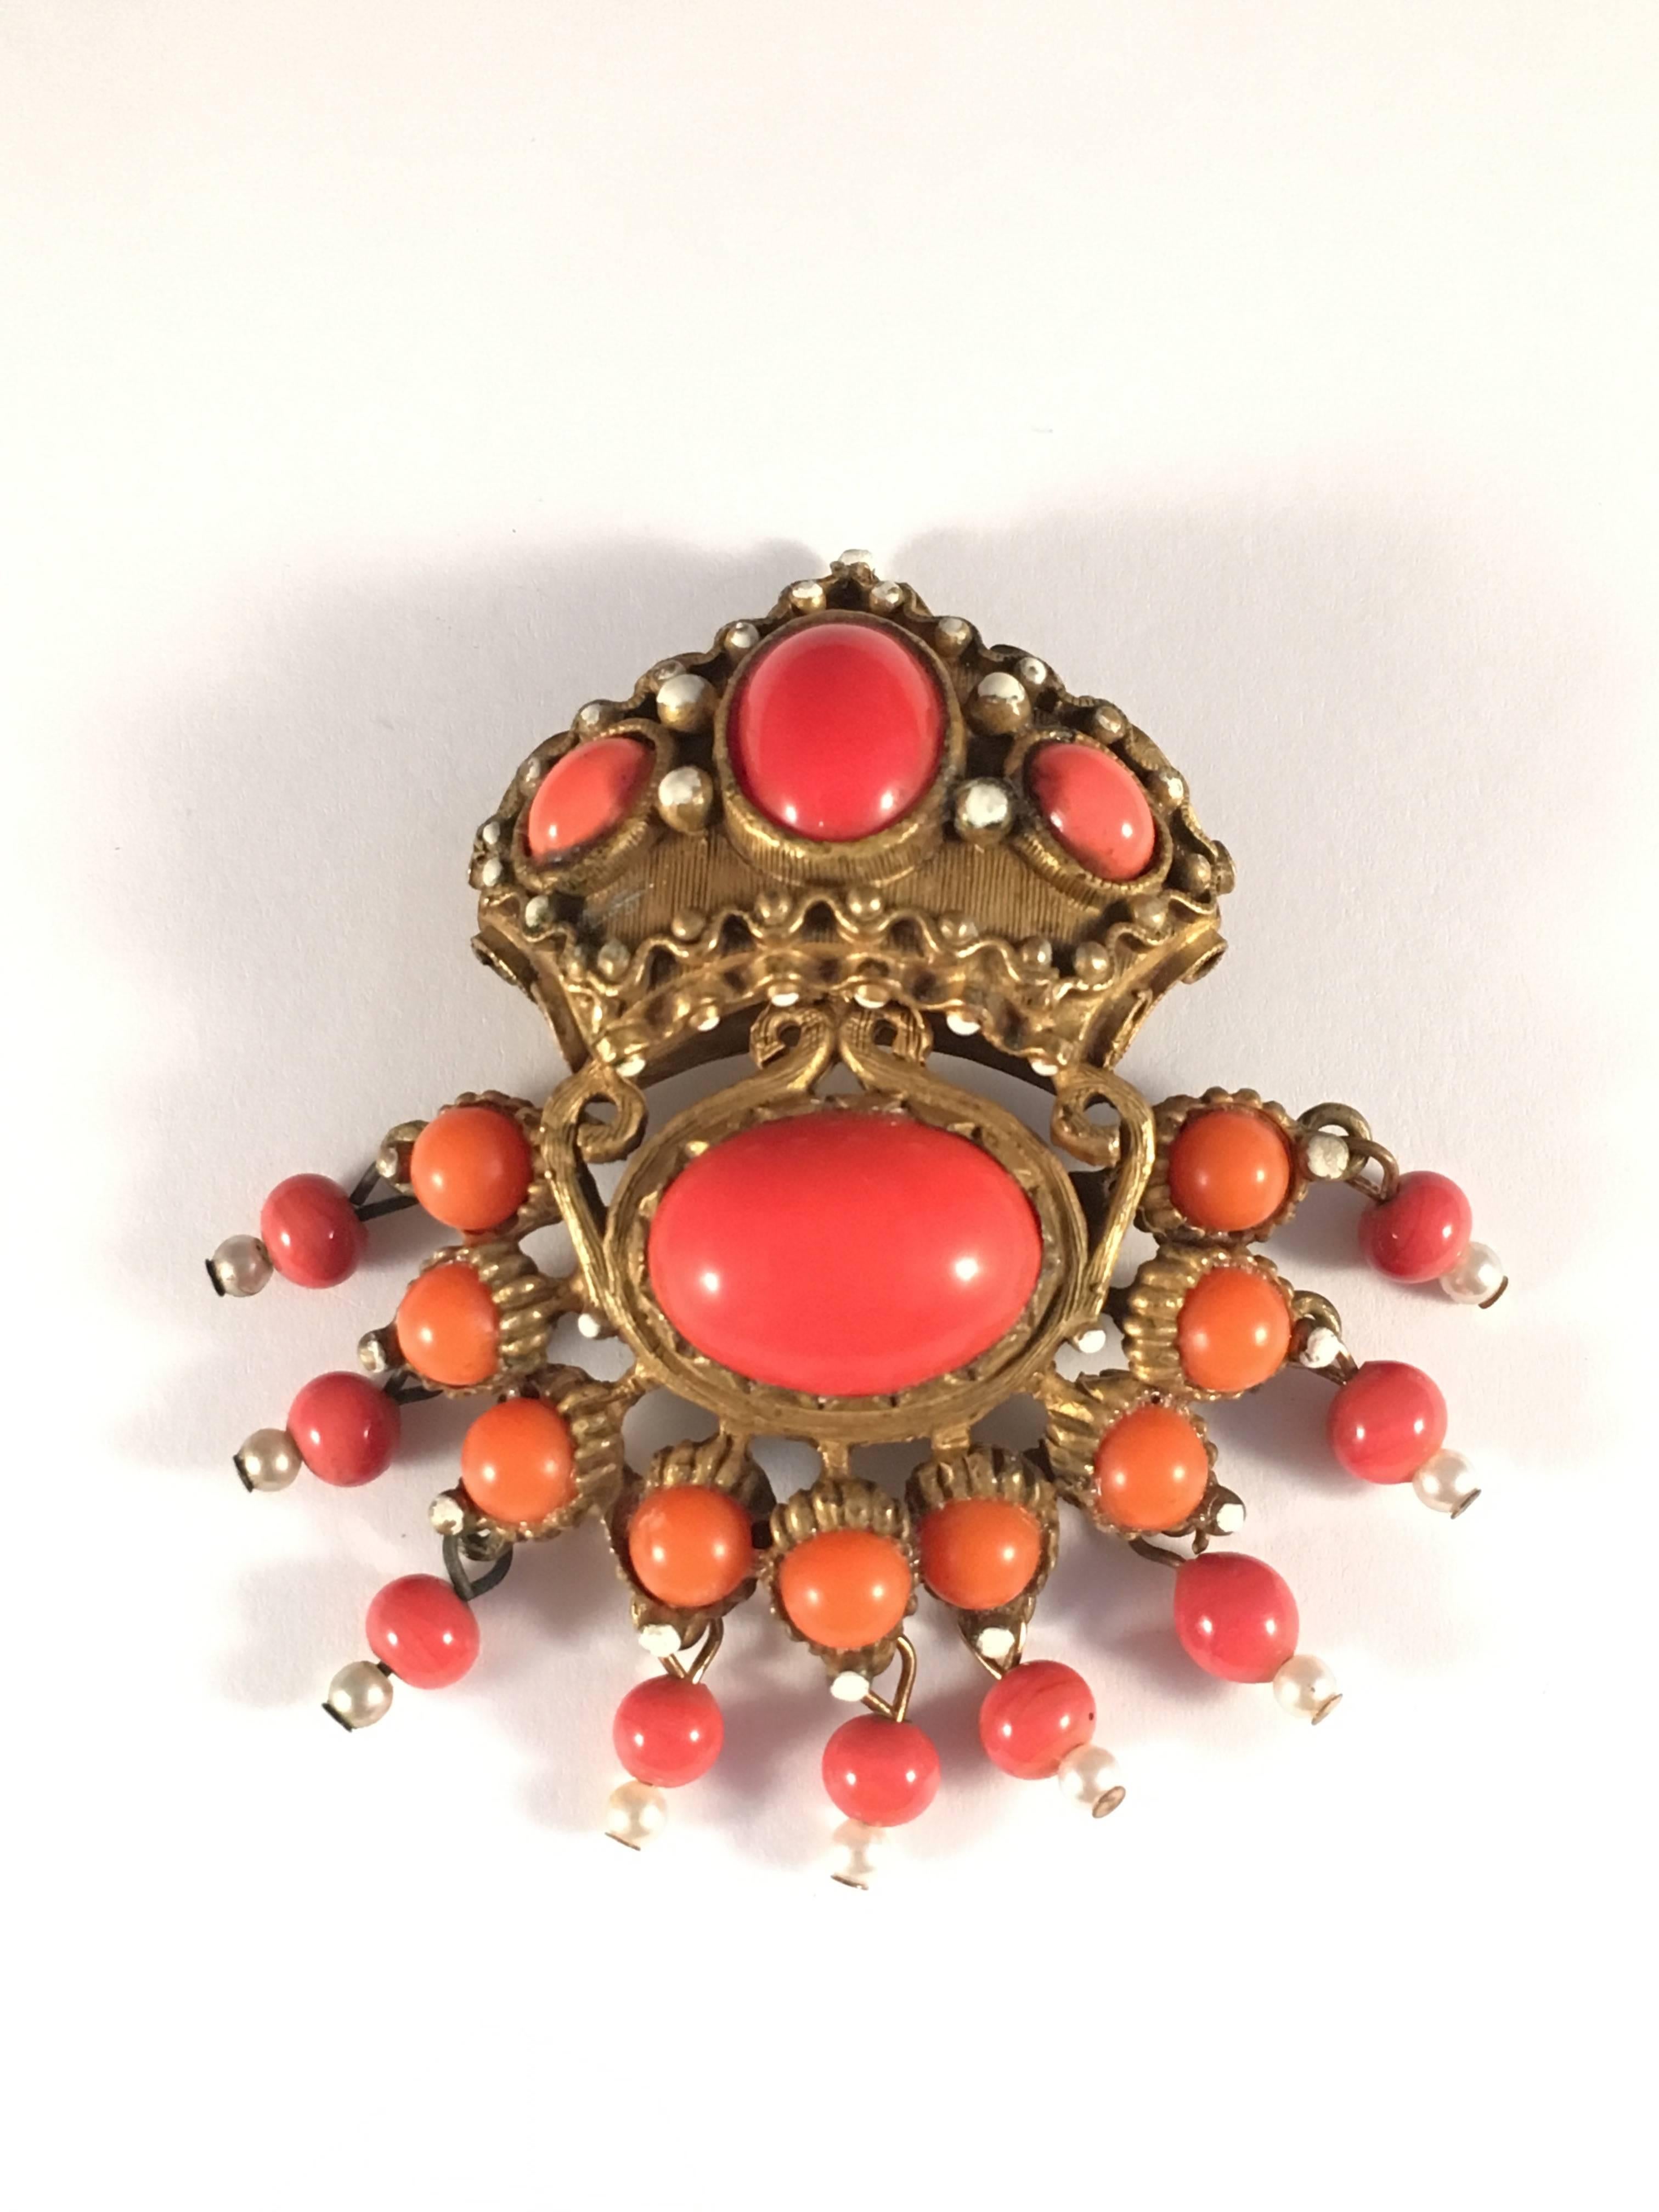 Kenneth Jay Lane Coral Colored Brooch and Earring Set 1960s 1